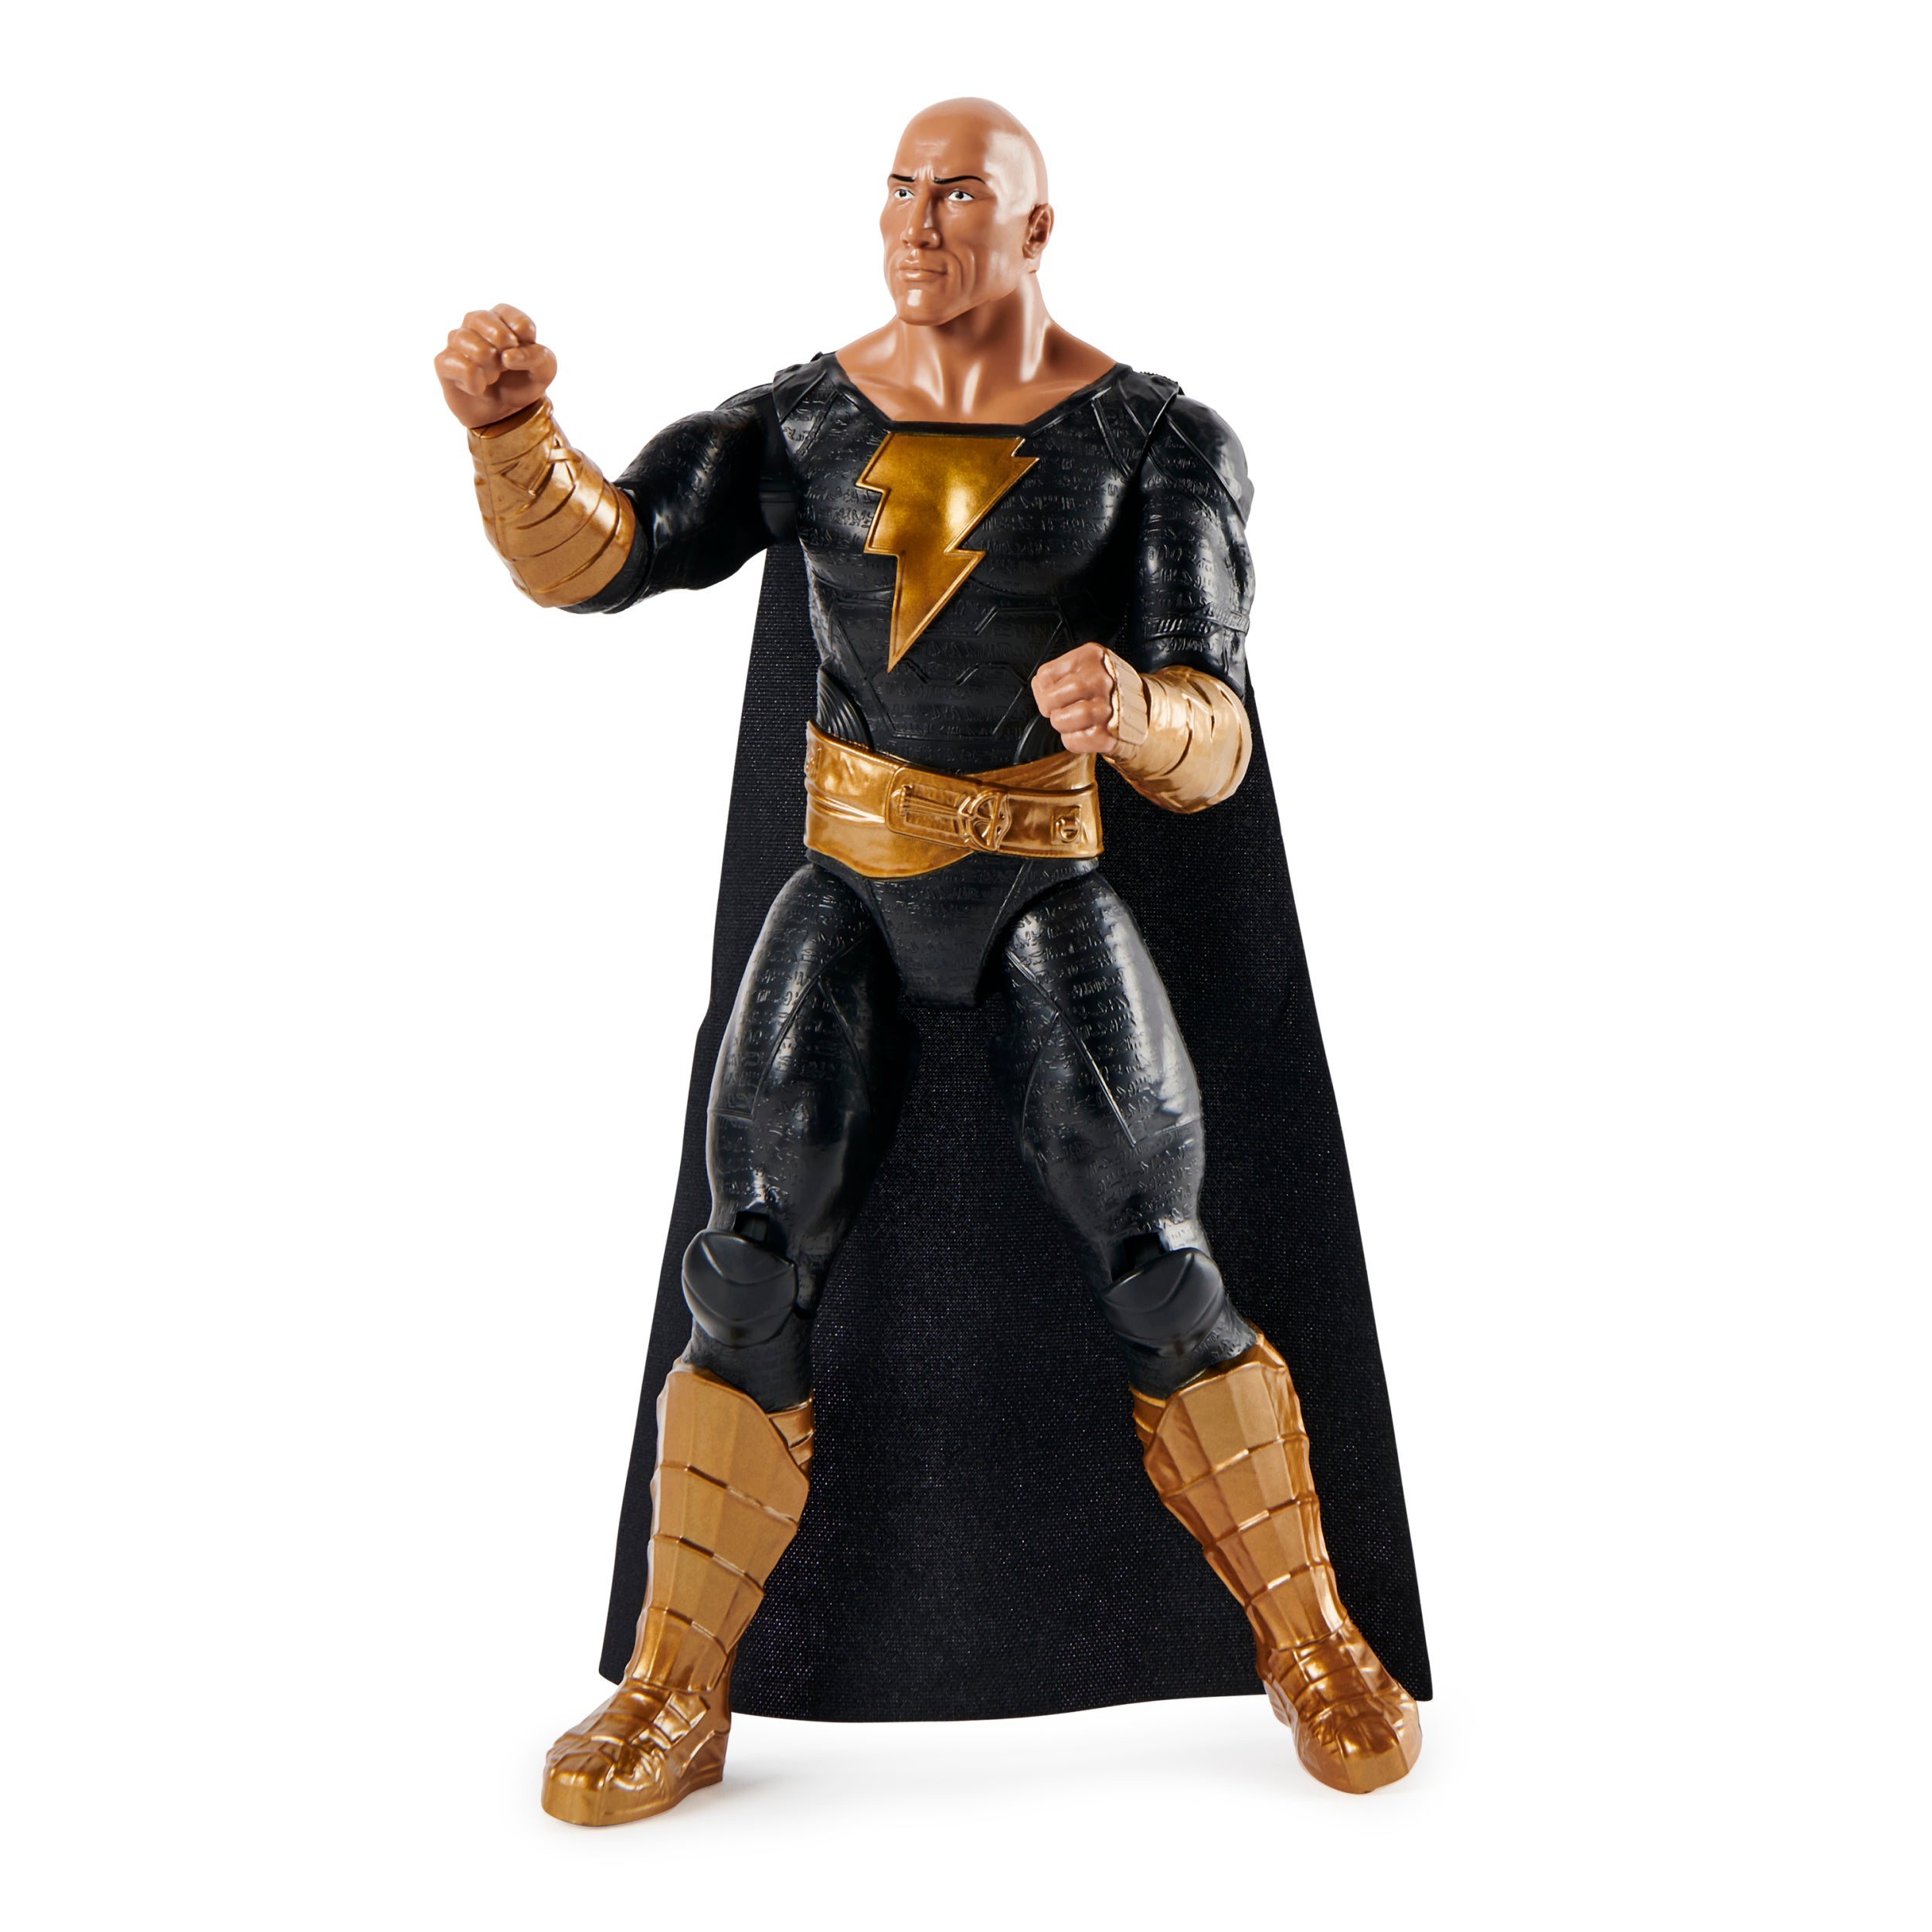 Spin Master - DC Comics, 12-inch Action Figure, Black Adam Movie Collectible Kids Toys for Boys and Girls Ages 3 and Up (Random Selection)